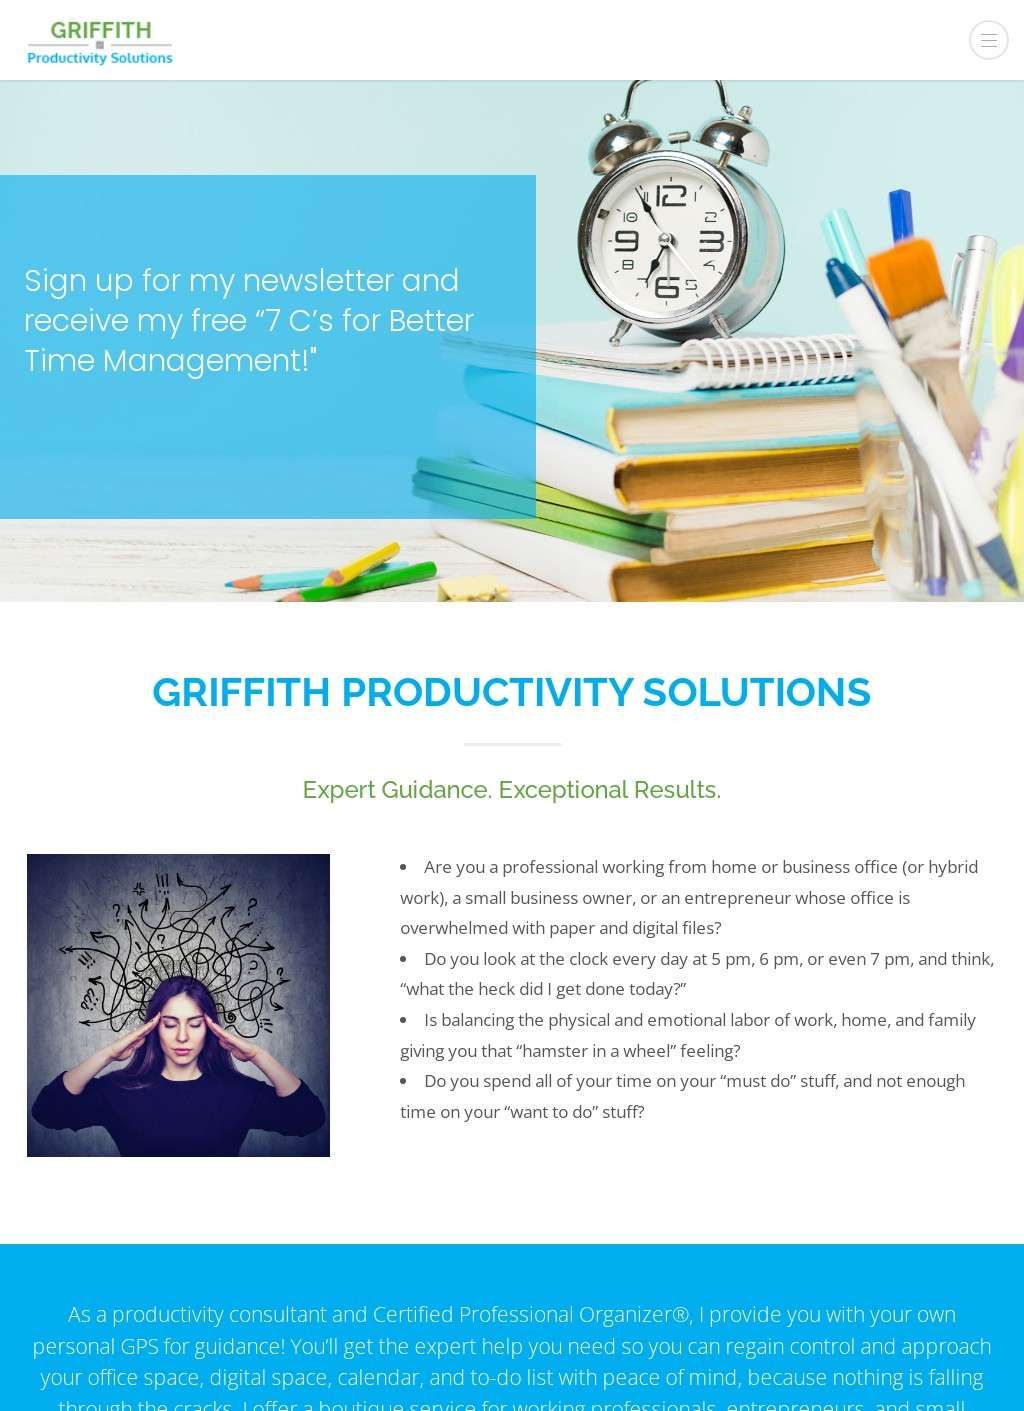 Griffith Productivity Solutions